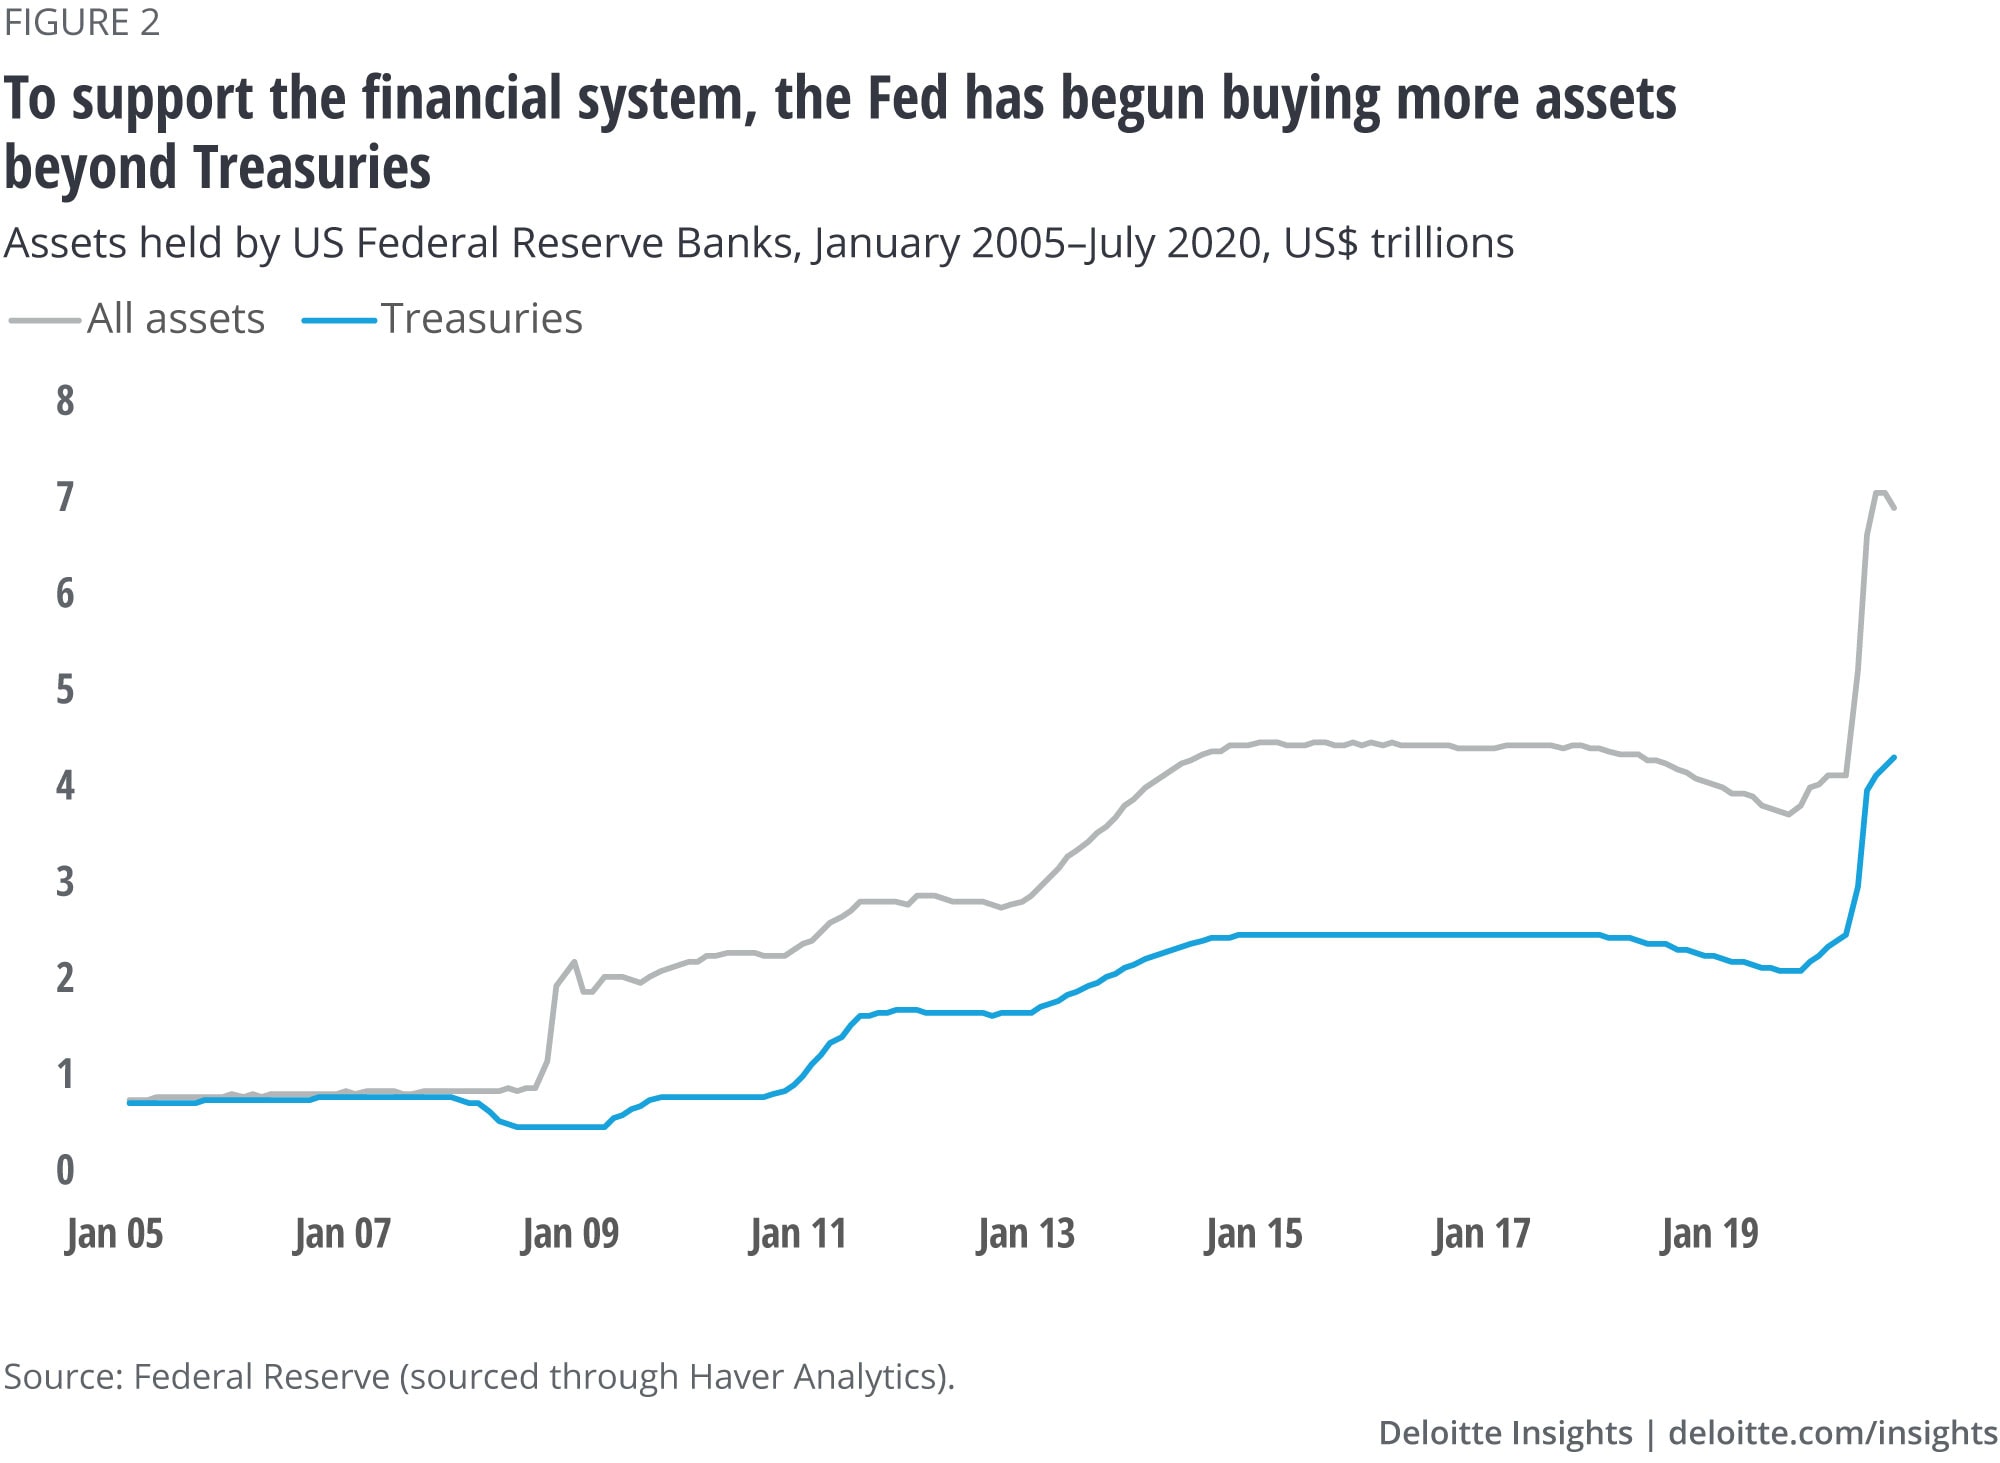 To support the financial system, the Fed has begun buying more assets beyond Treasuries